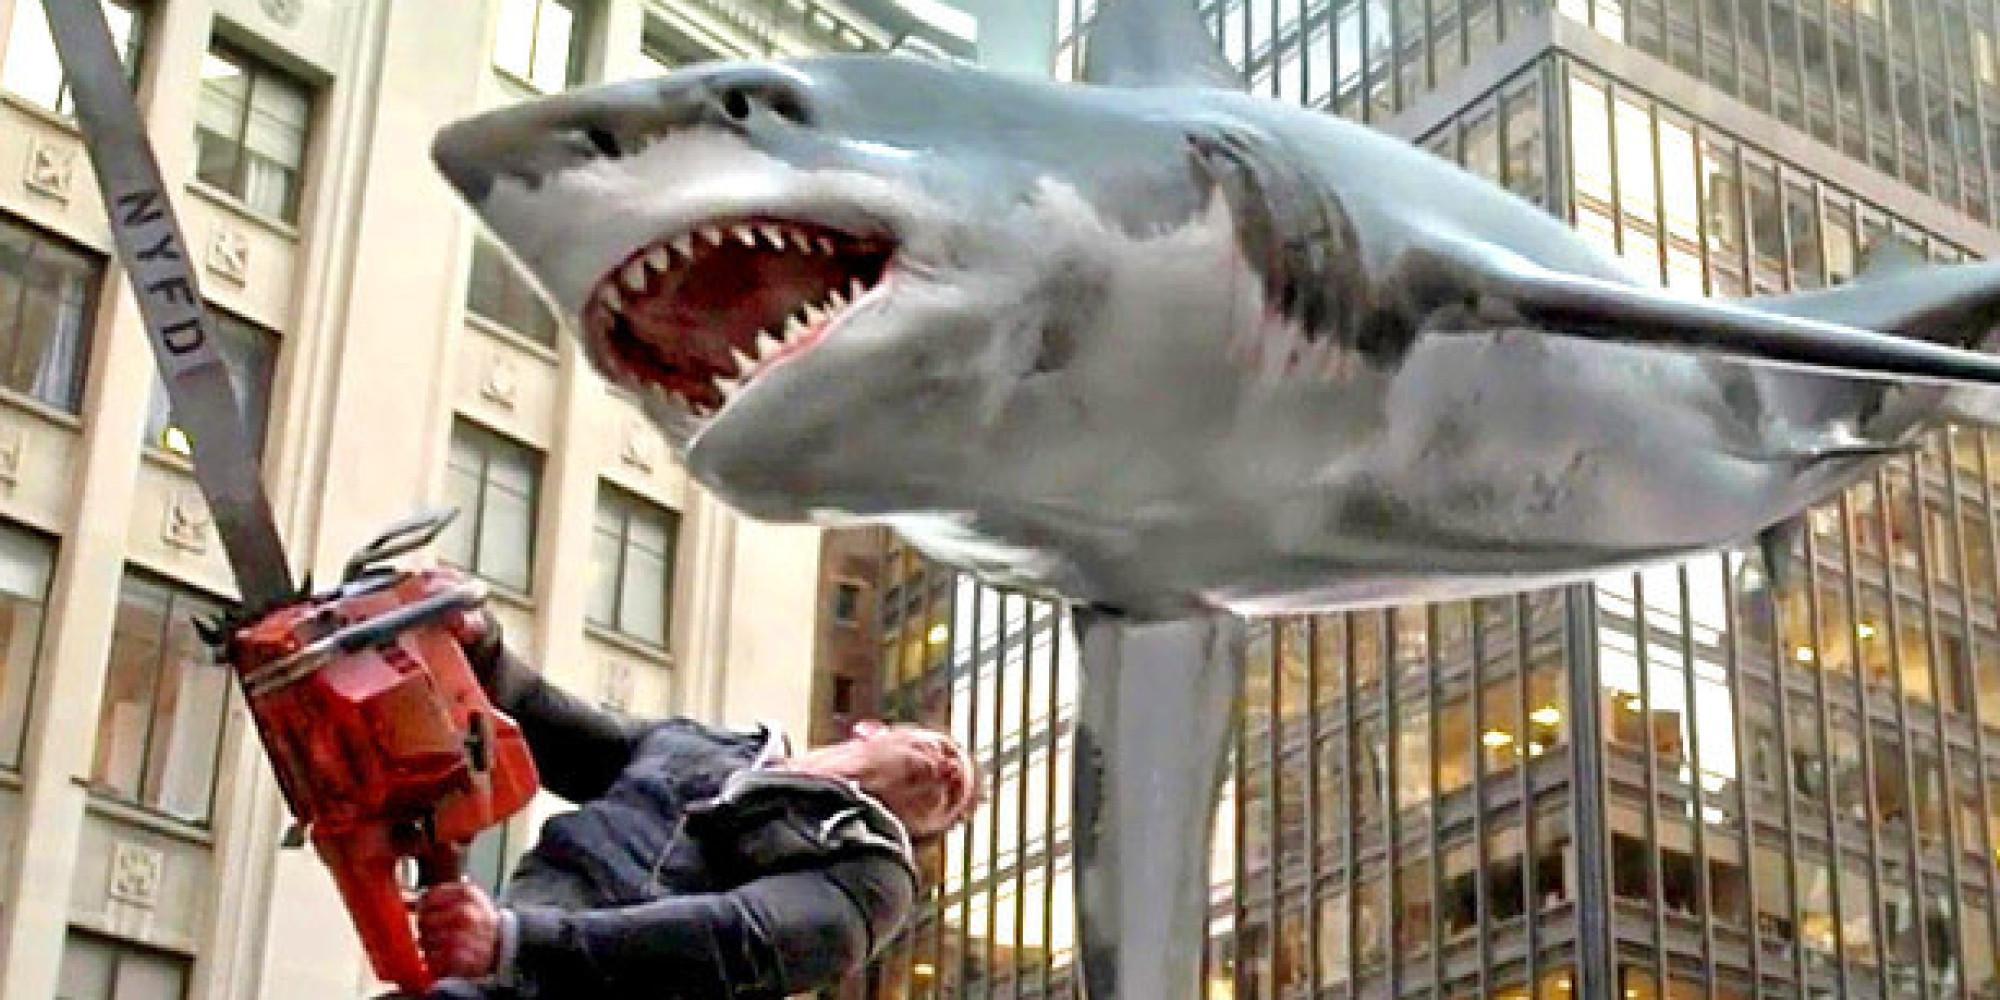 Amazing Sharknado Pictures & Backgrounds